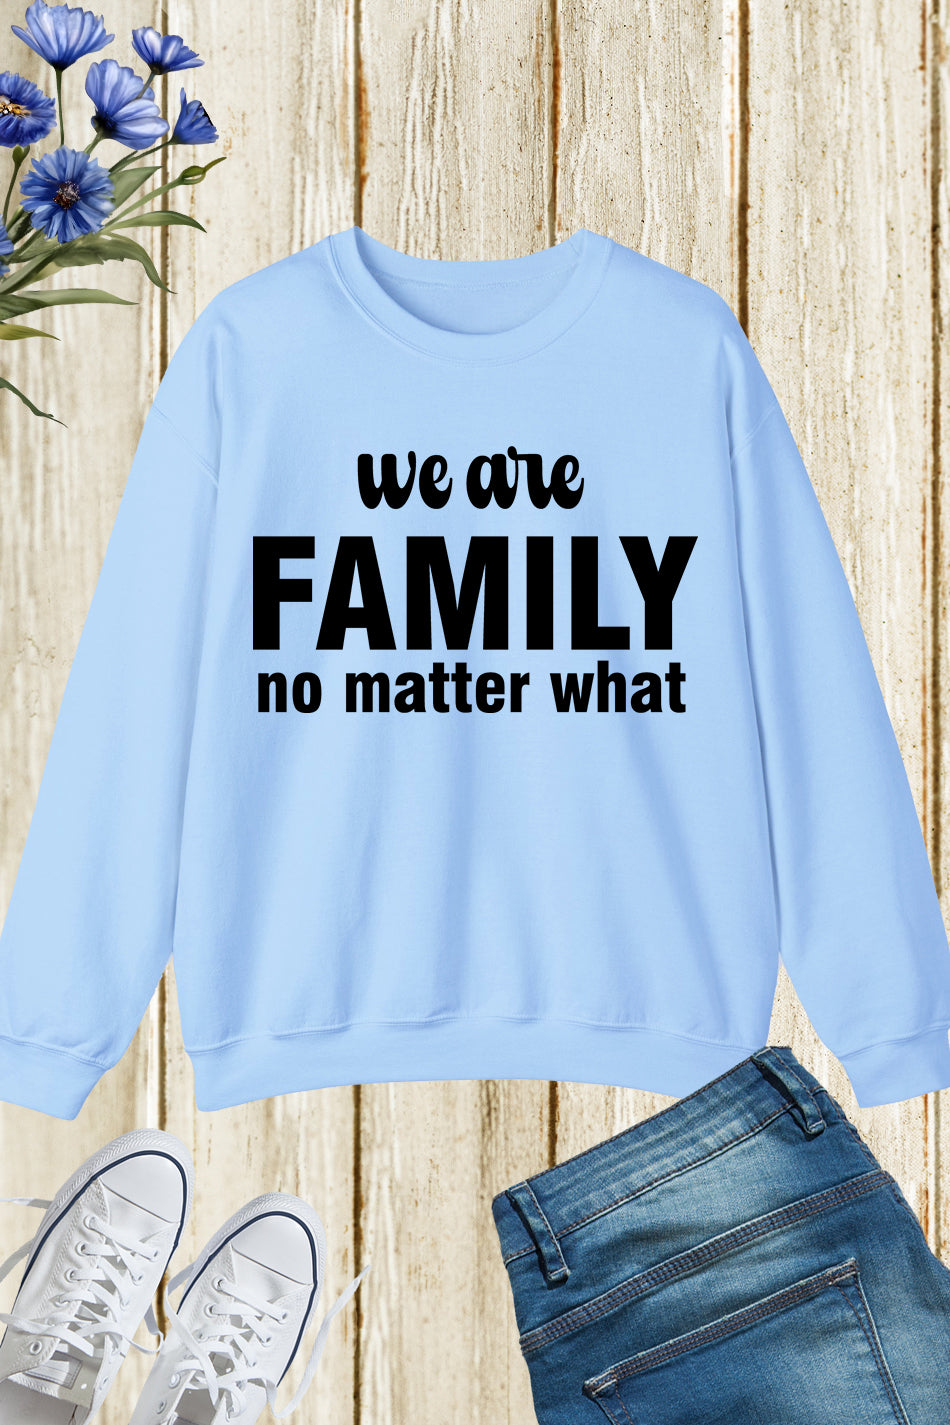 We Are Family No Matter What Sweatshirts